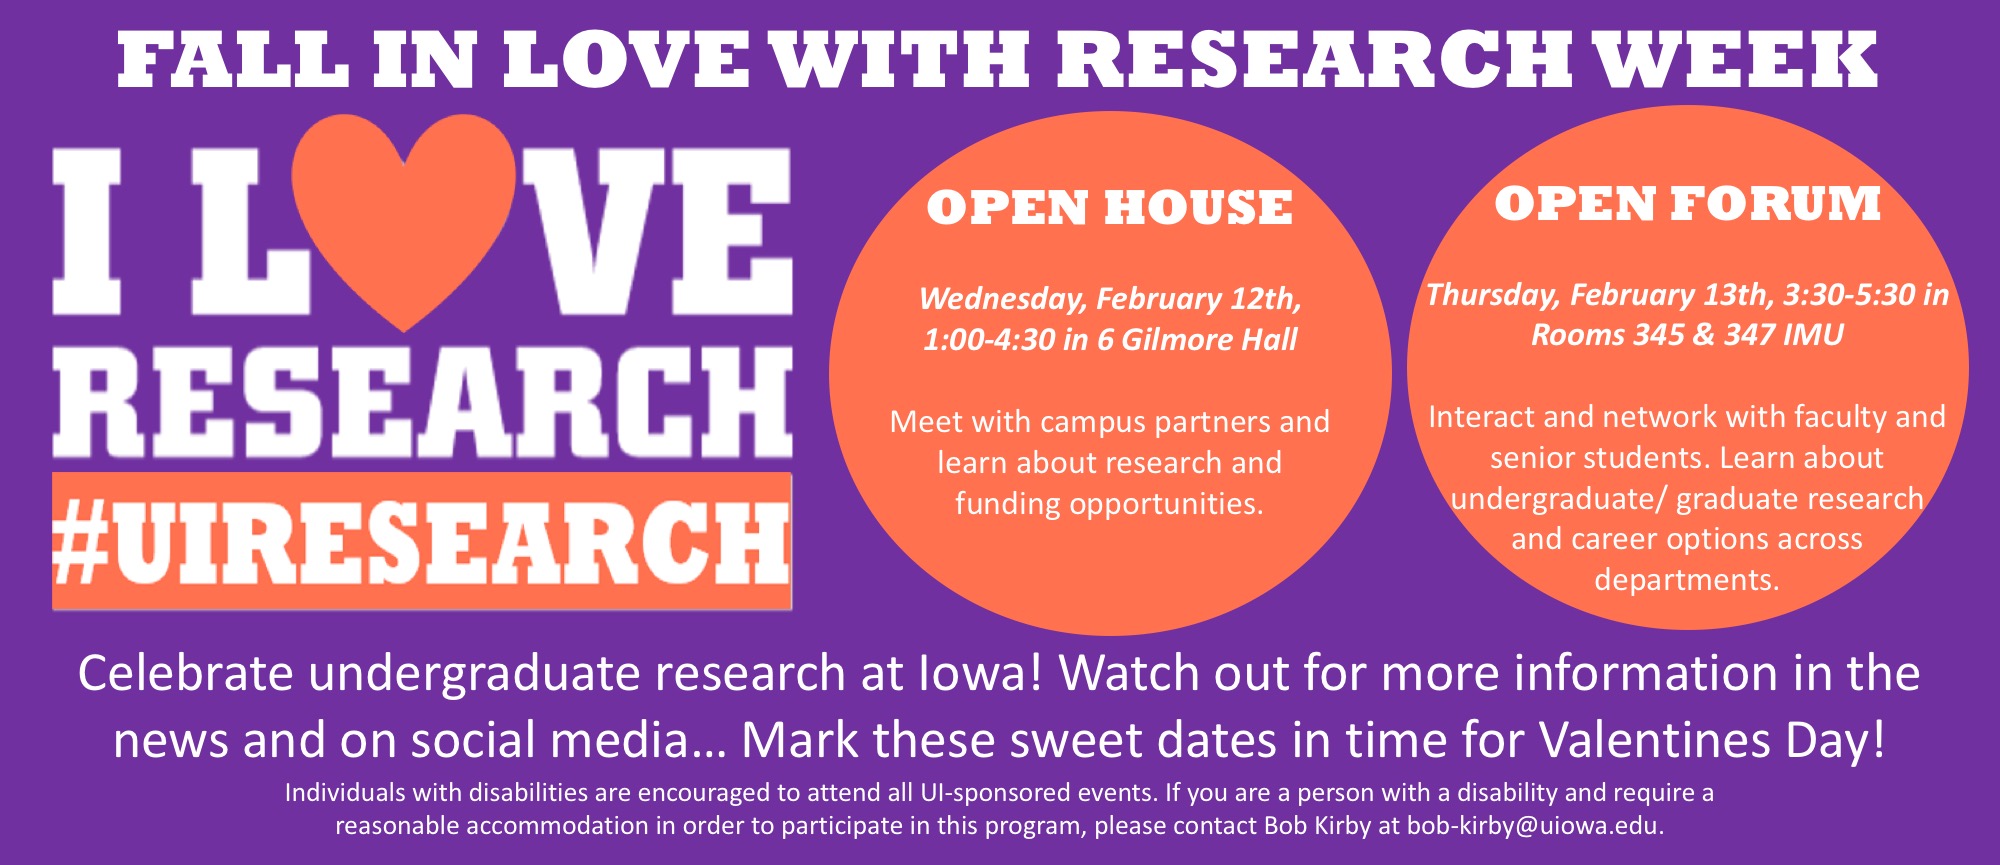 Fall in Love with Research Week